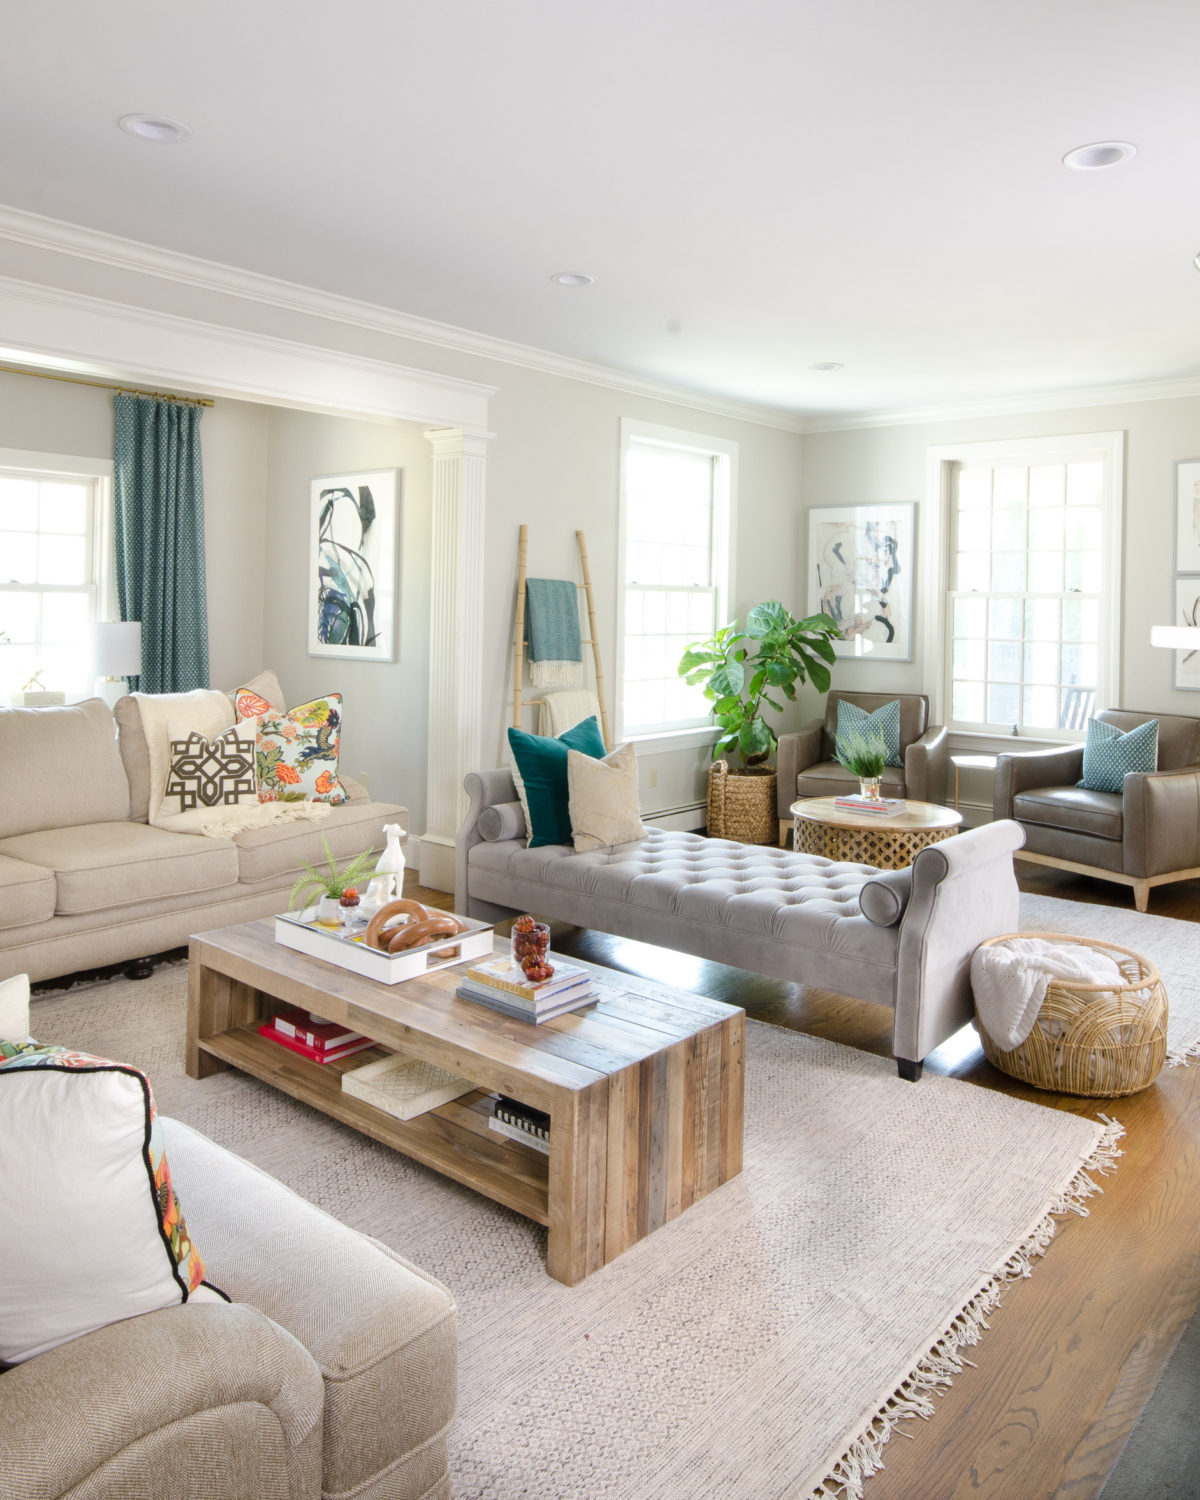 Beautiful neutral family room with pops of color and wood accents. Backless sofa divides the long room into two seating areas. Nice mix of traditional and rustic styles. 